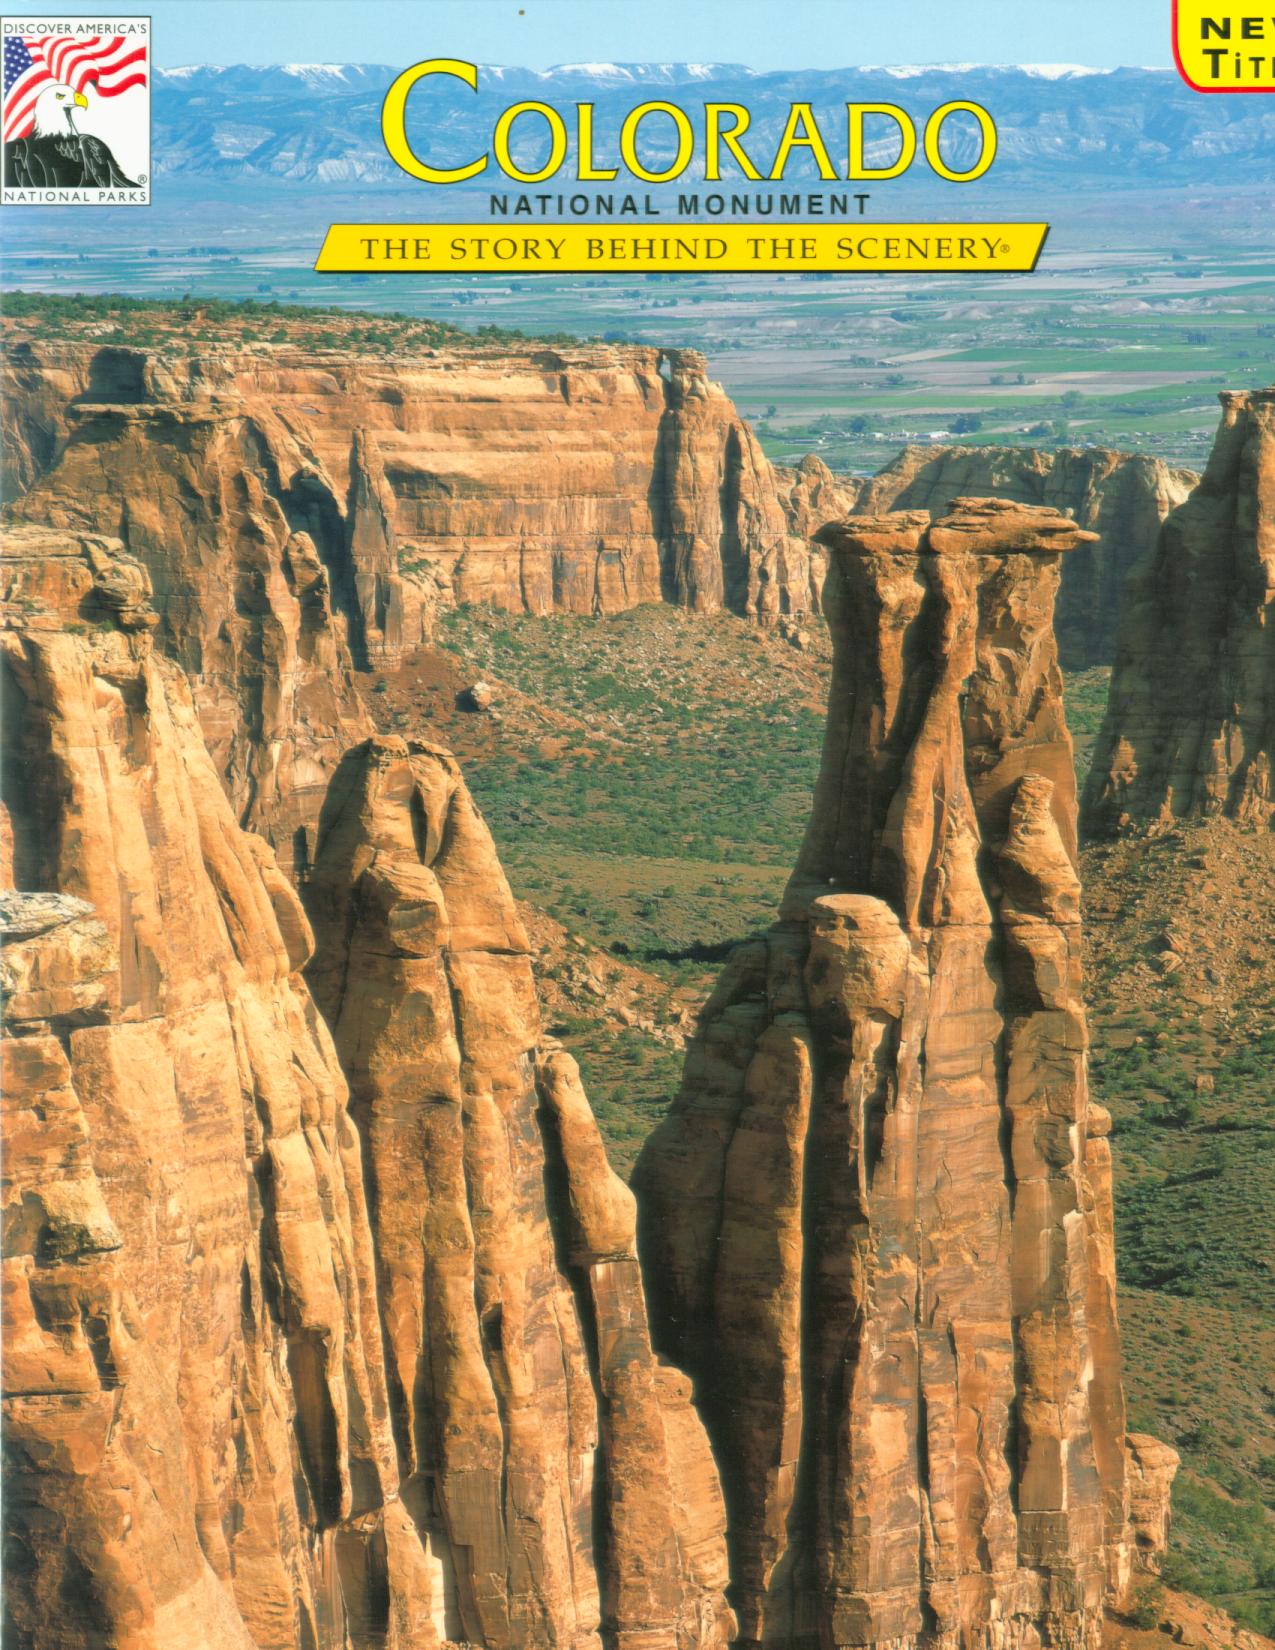 COLORADO NATIONAL MONUMENT: the story behind the scenery (CO).